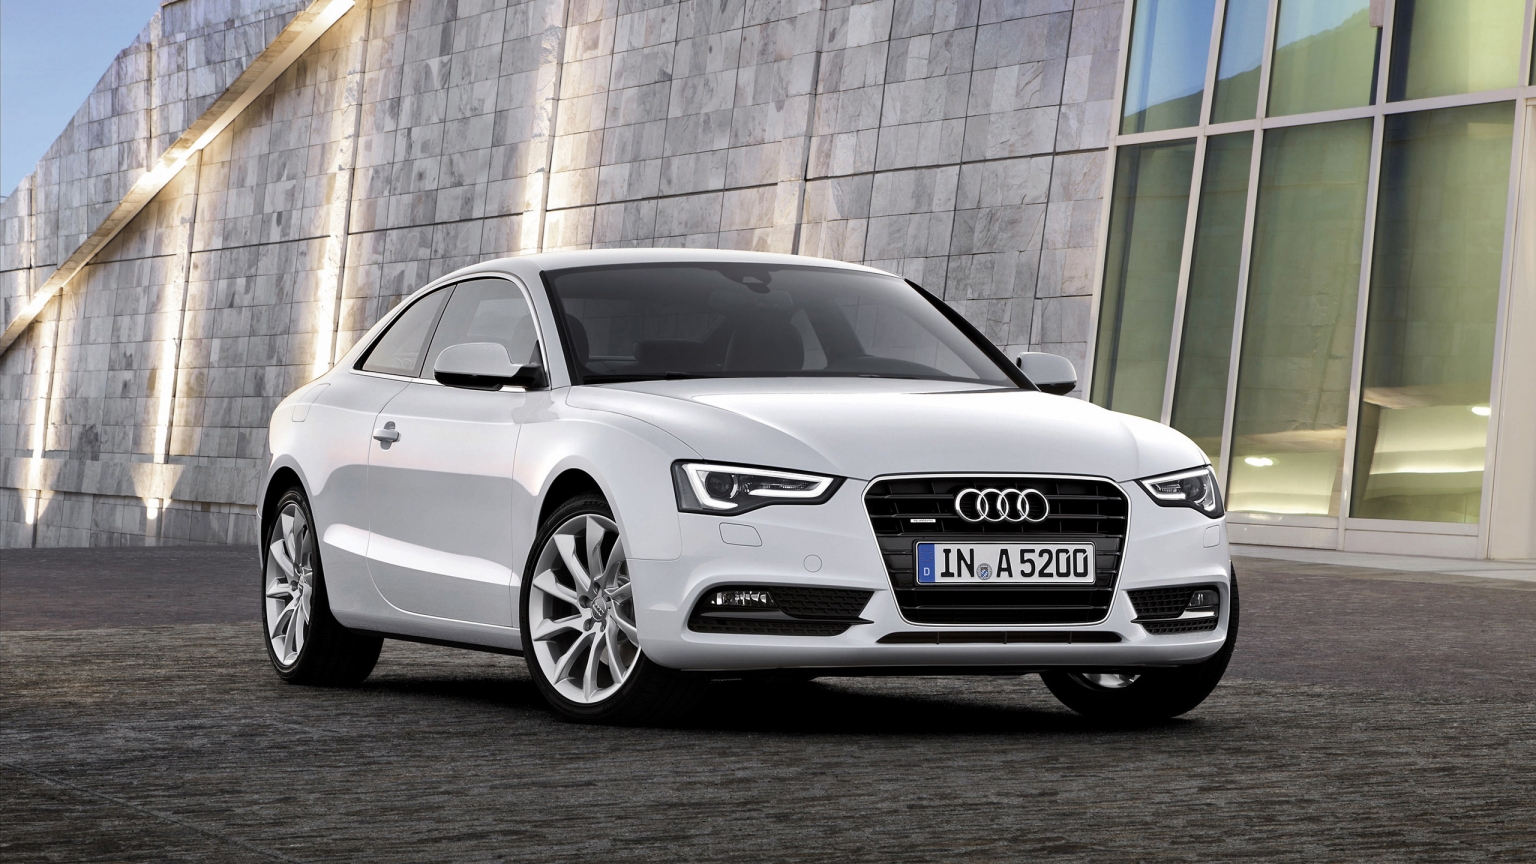 2012 Audi A5 Coupe for 1536 x 864 HDTV resolution